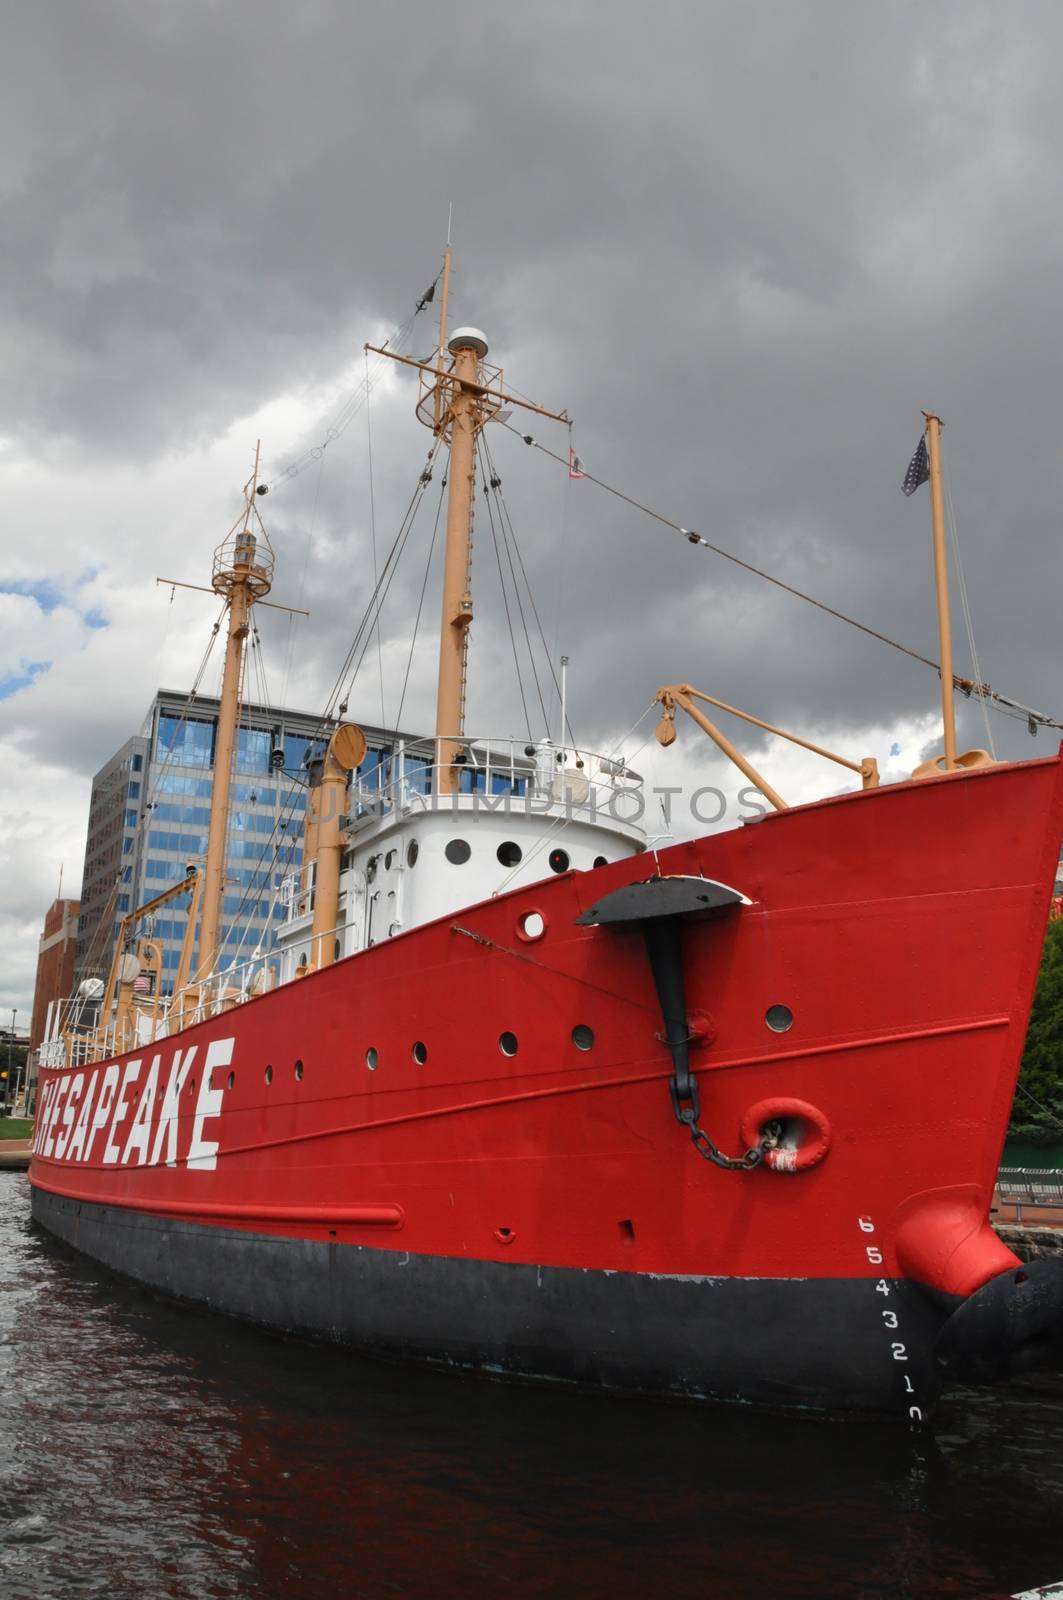 United States lightship Chesapeake (LV-116) docked at the Inner Harbor in Baltimore, Maryland